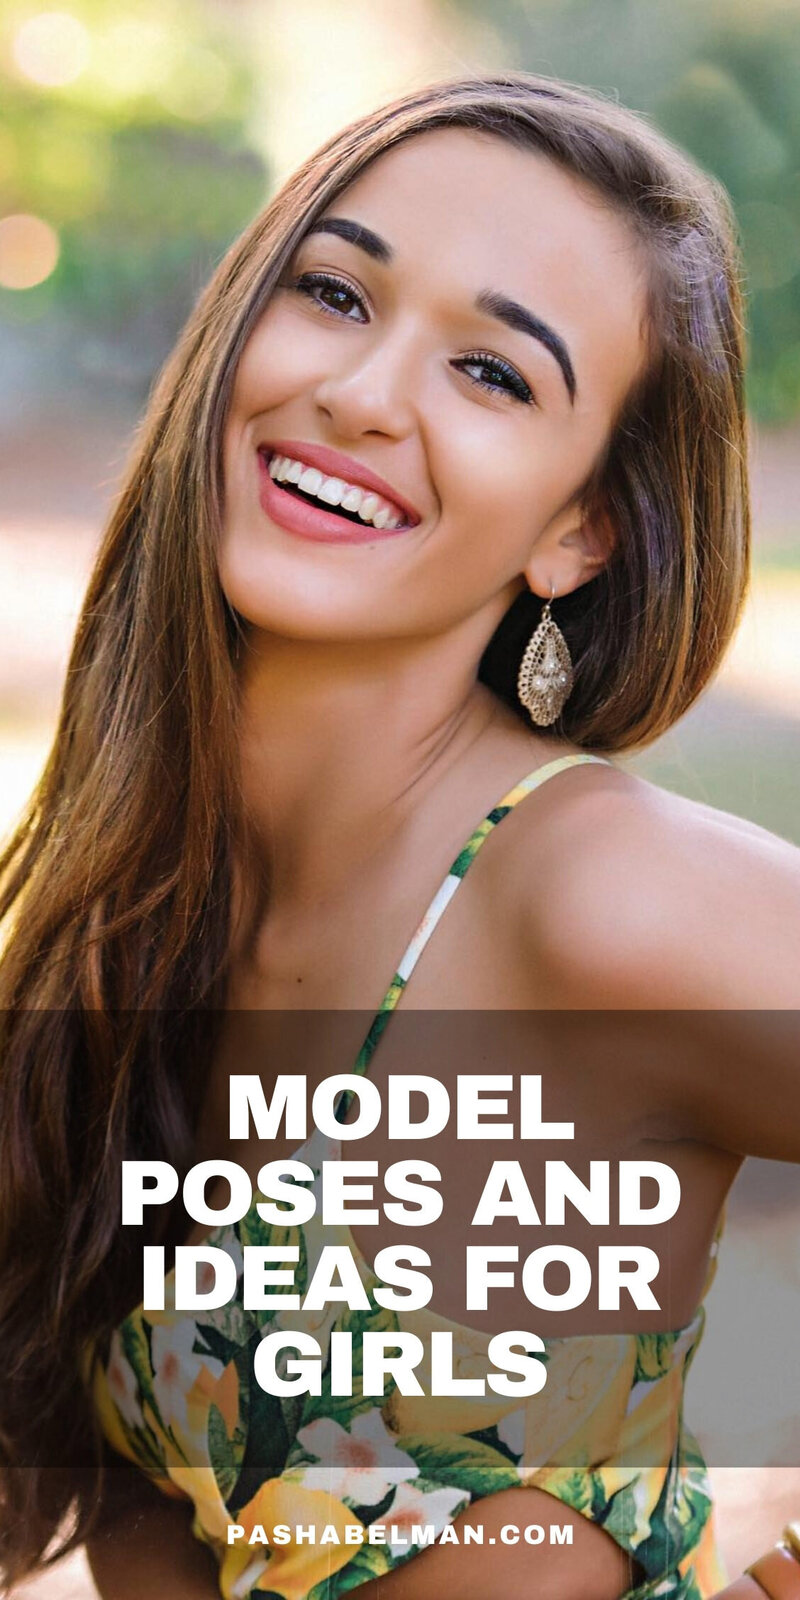 Best Model Poses - Top Model Poses from top Photographer